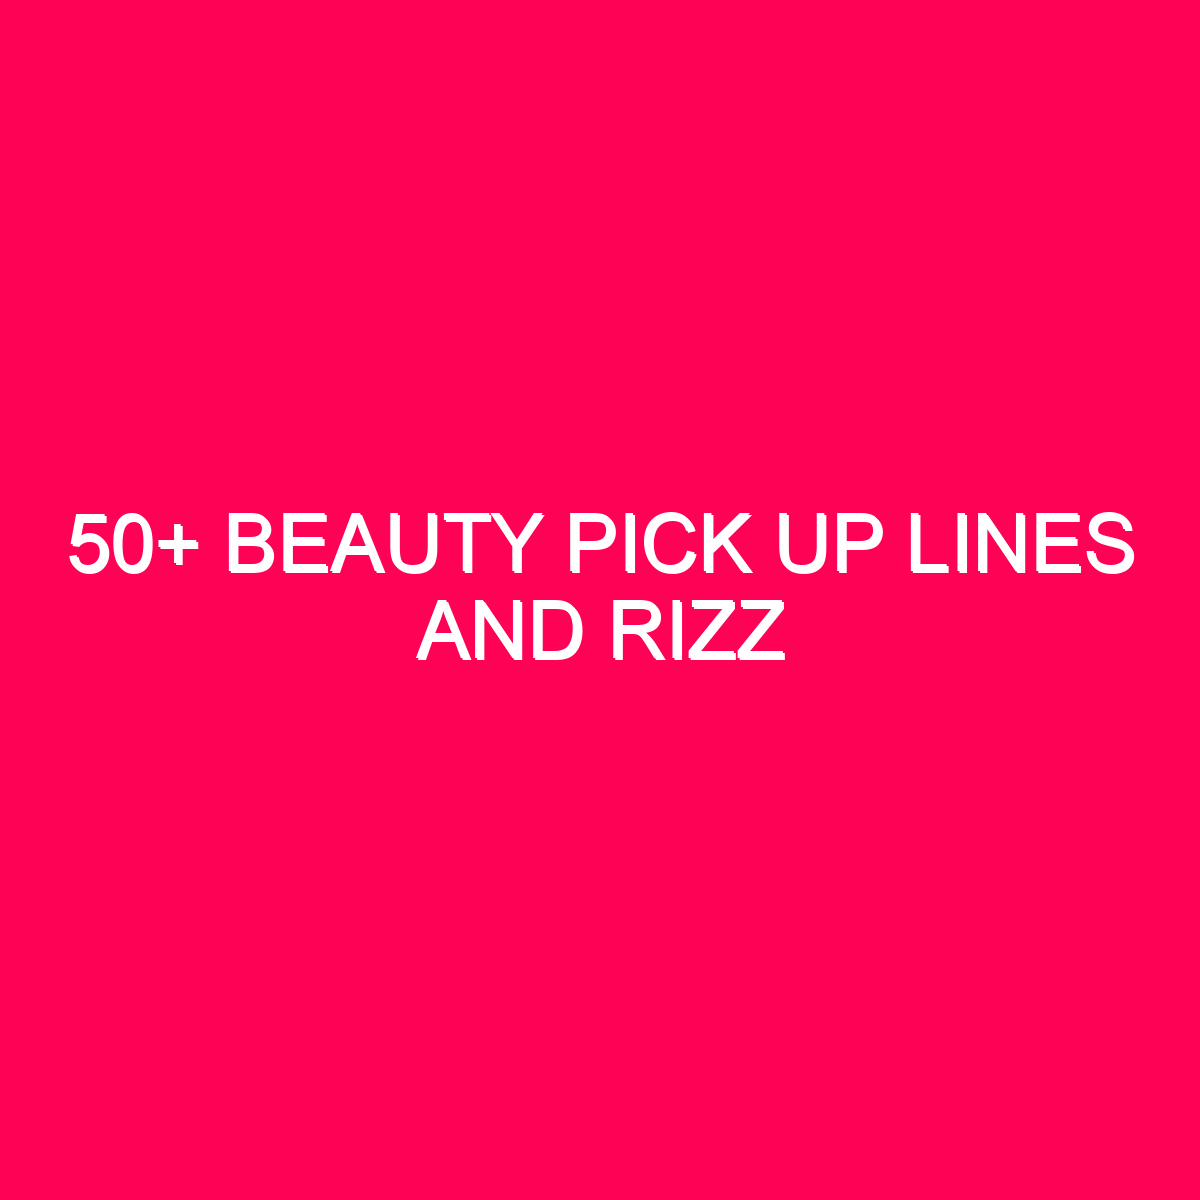 50+ Beauty Pick Up Lines And Rizz